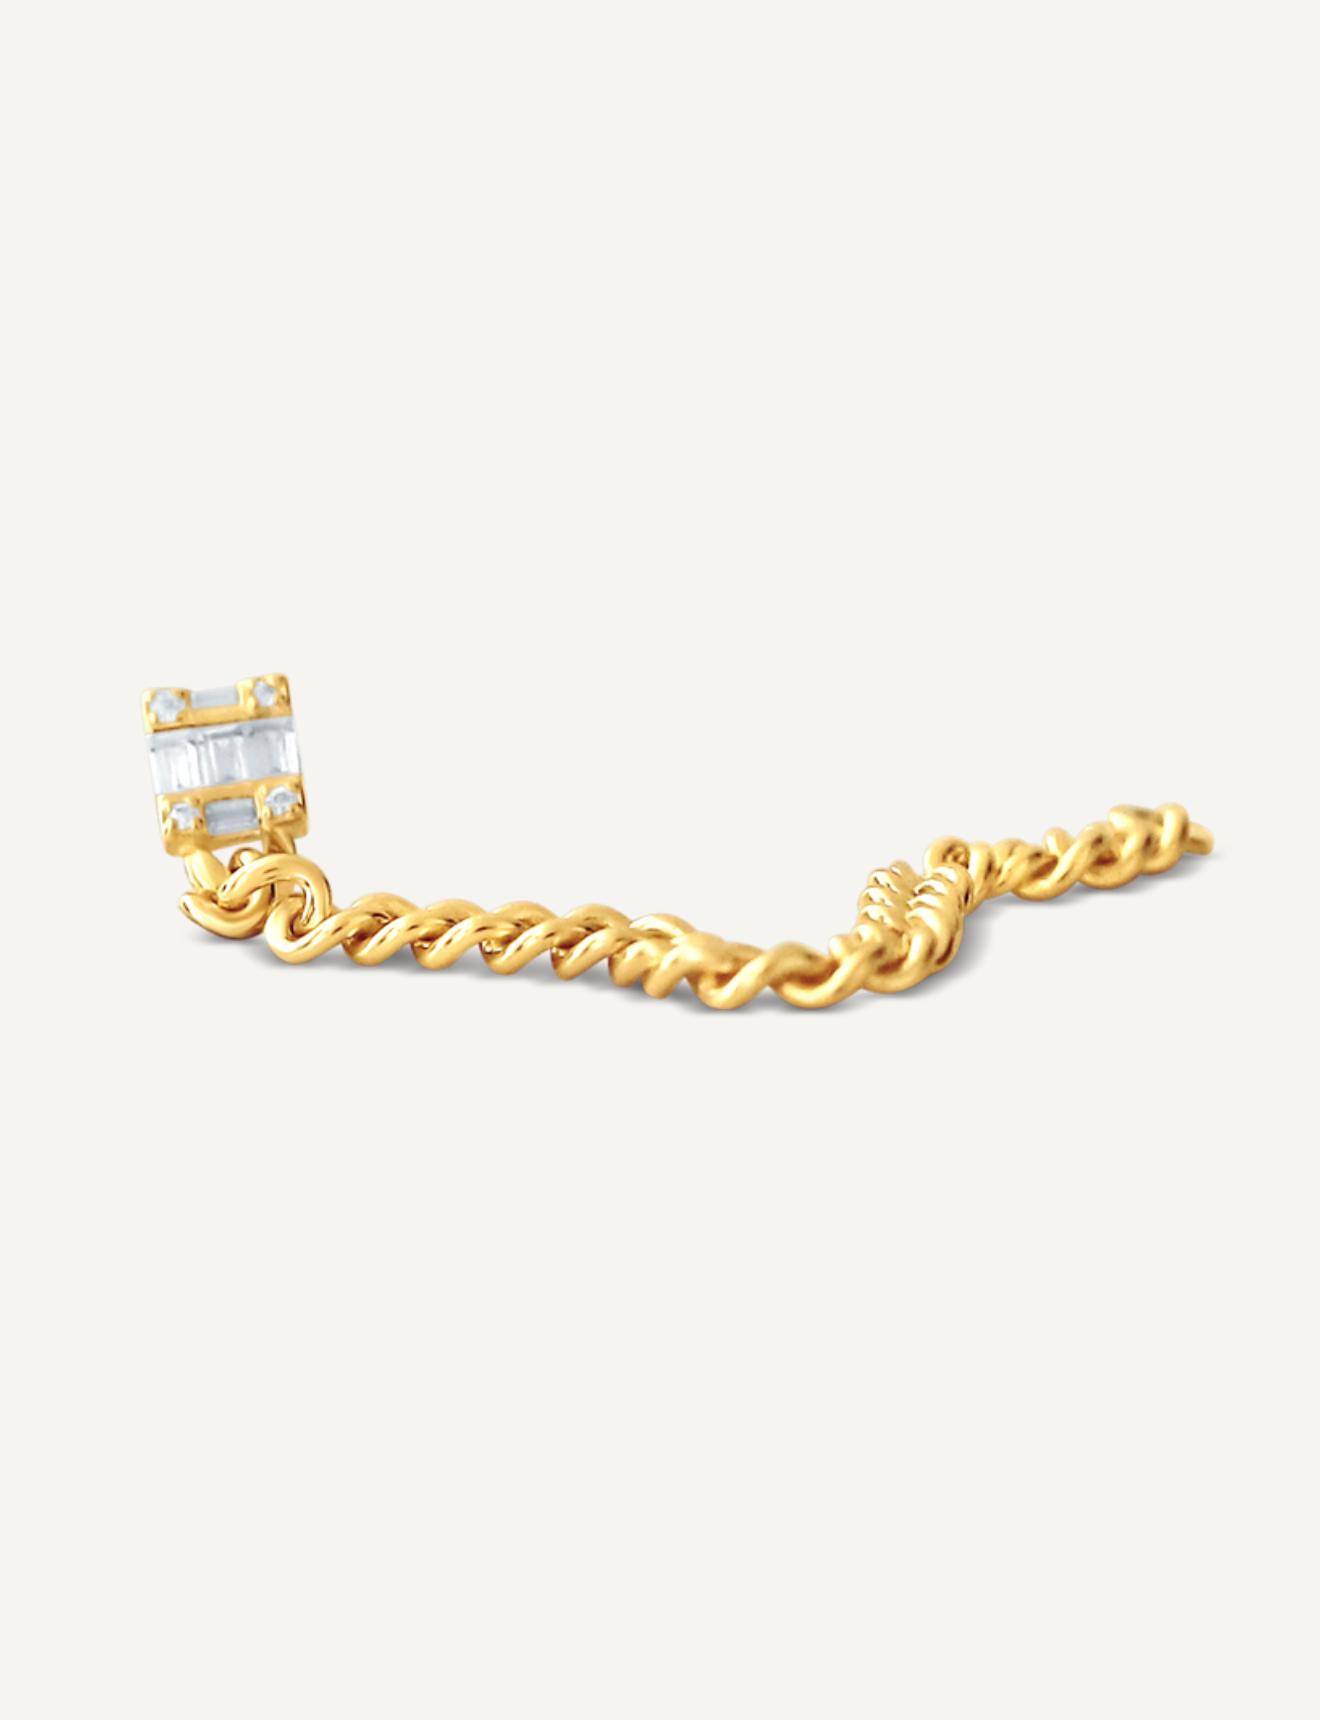 18K Gold Filled chain earring connected to a square cut clear Cubic Zirconia stud.